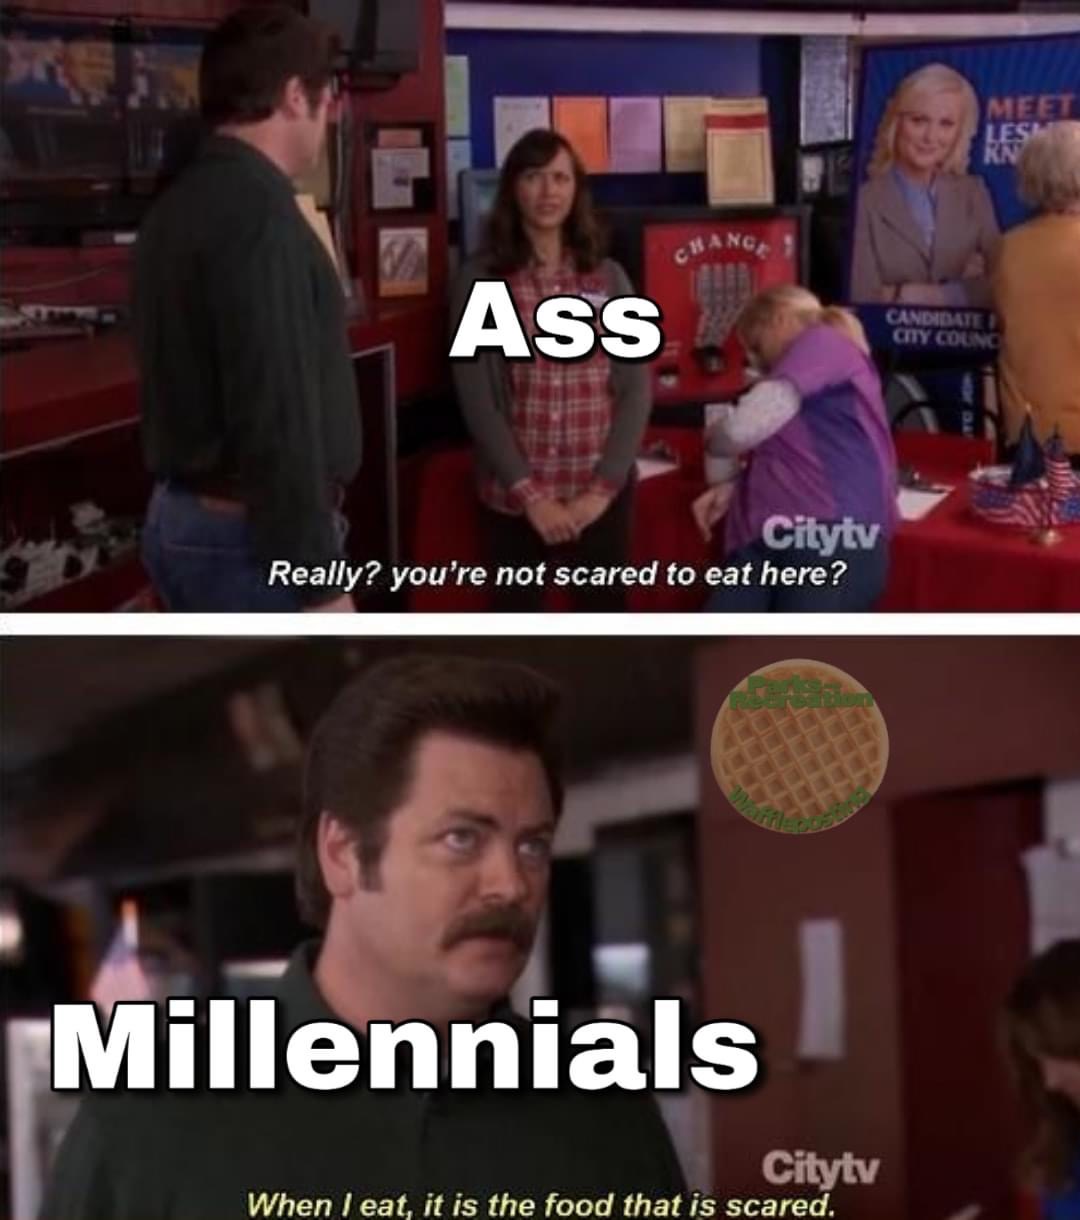 parks and rec ron food - Les Ass Candidate Cityty Really? you're not scared to eat here? Millennials Cityty When I eat it is the food that is scared